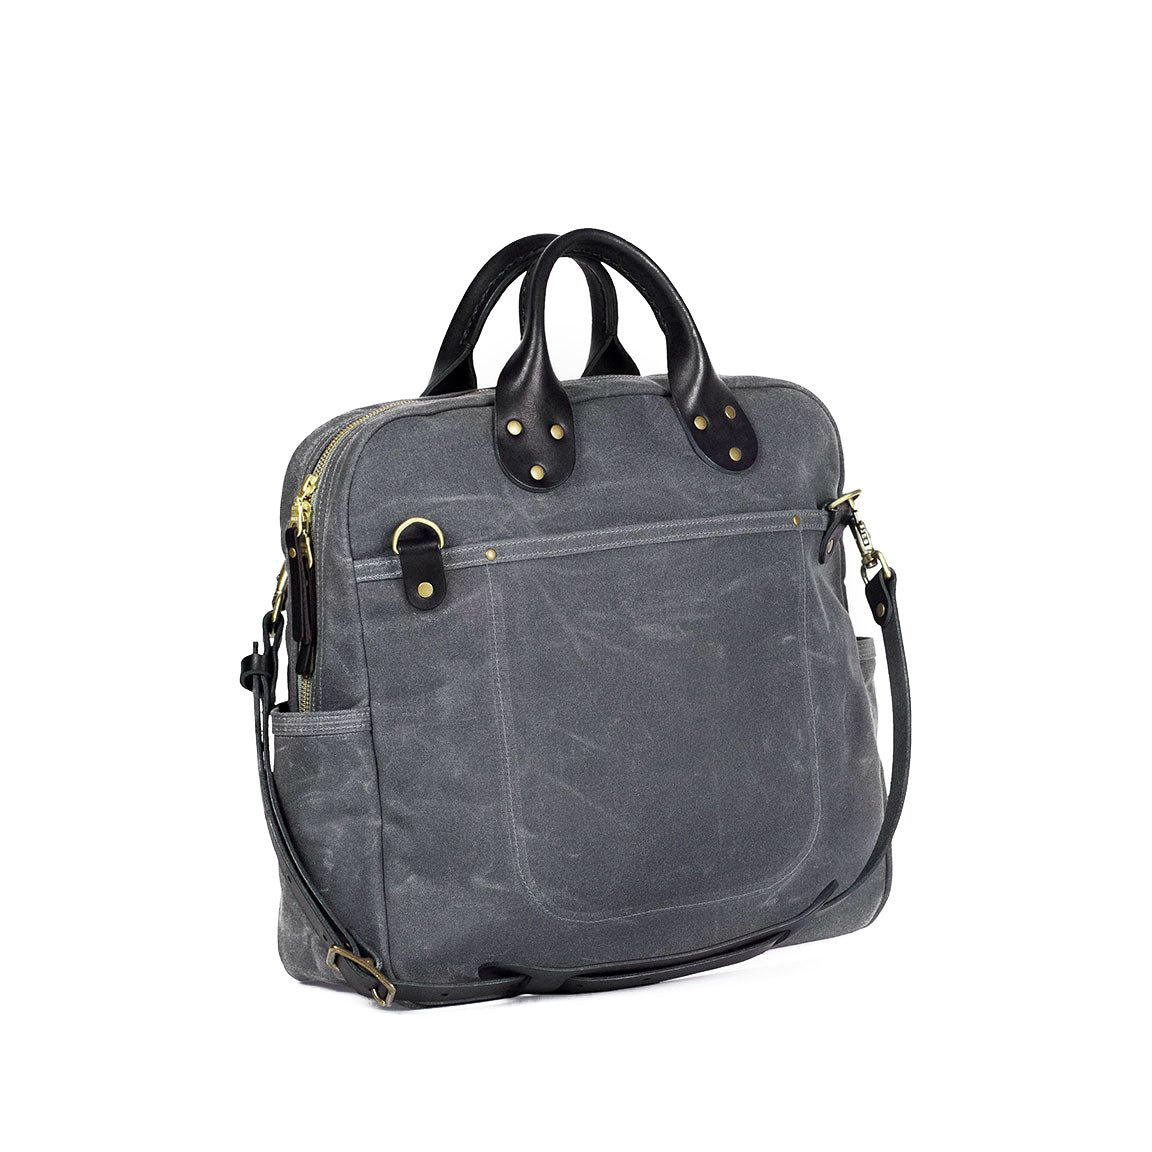 Everyday Bag Grey Waxed Canvas & Black Leather